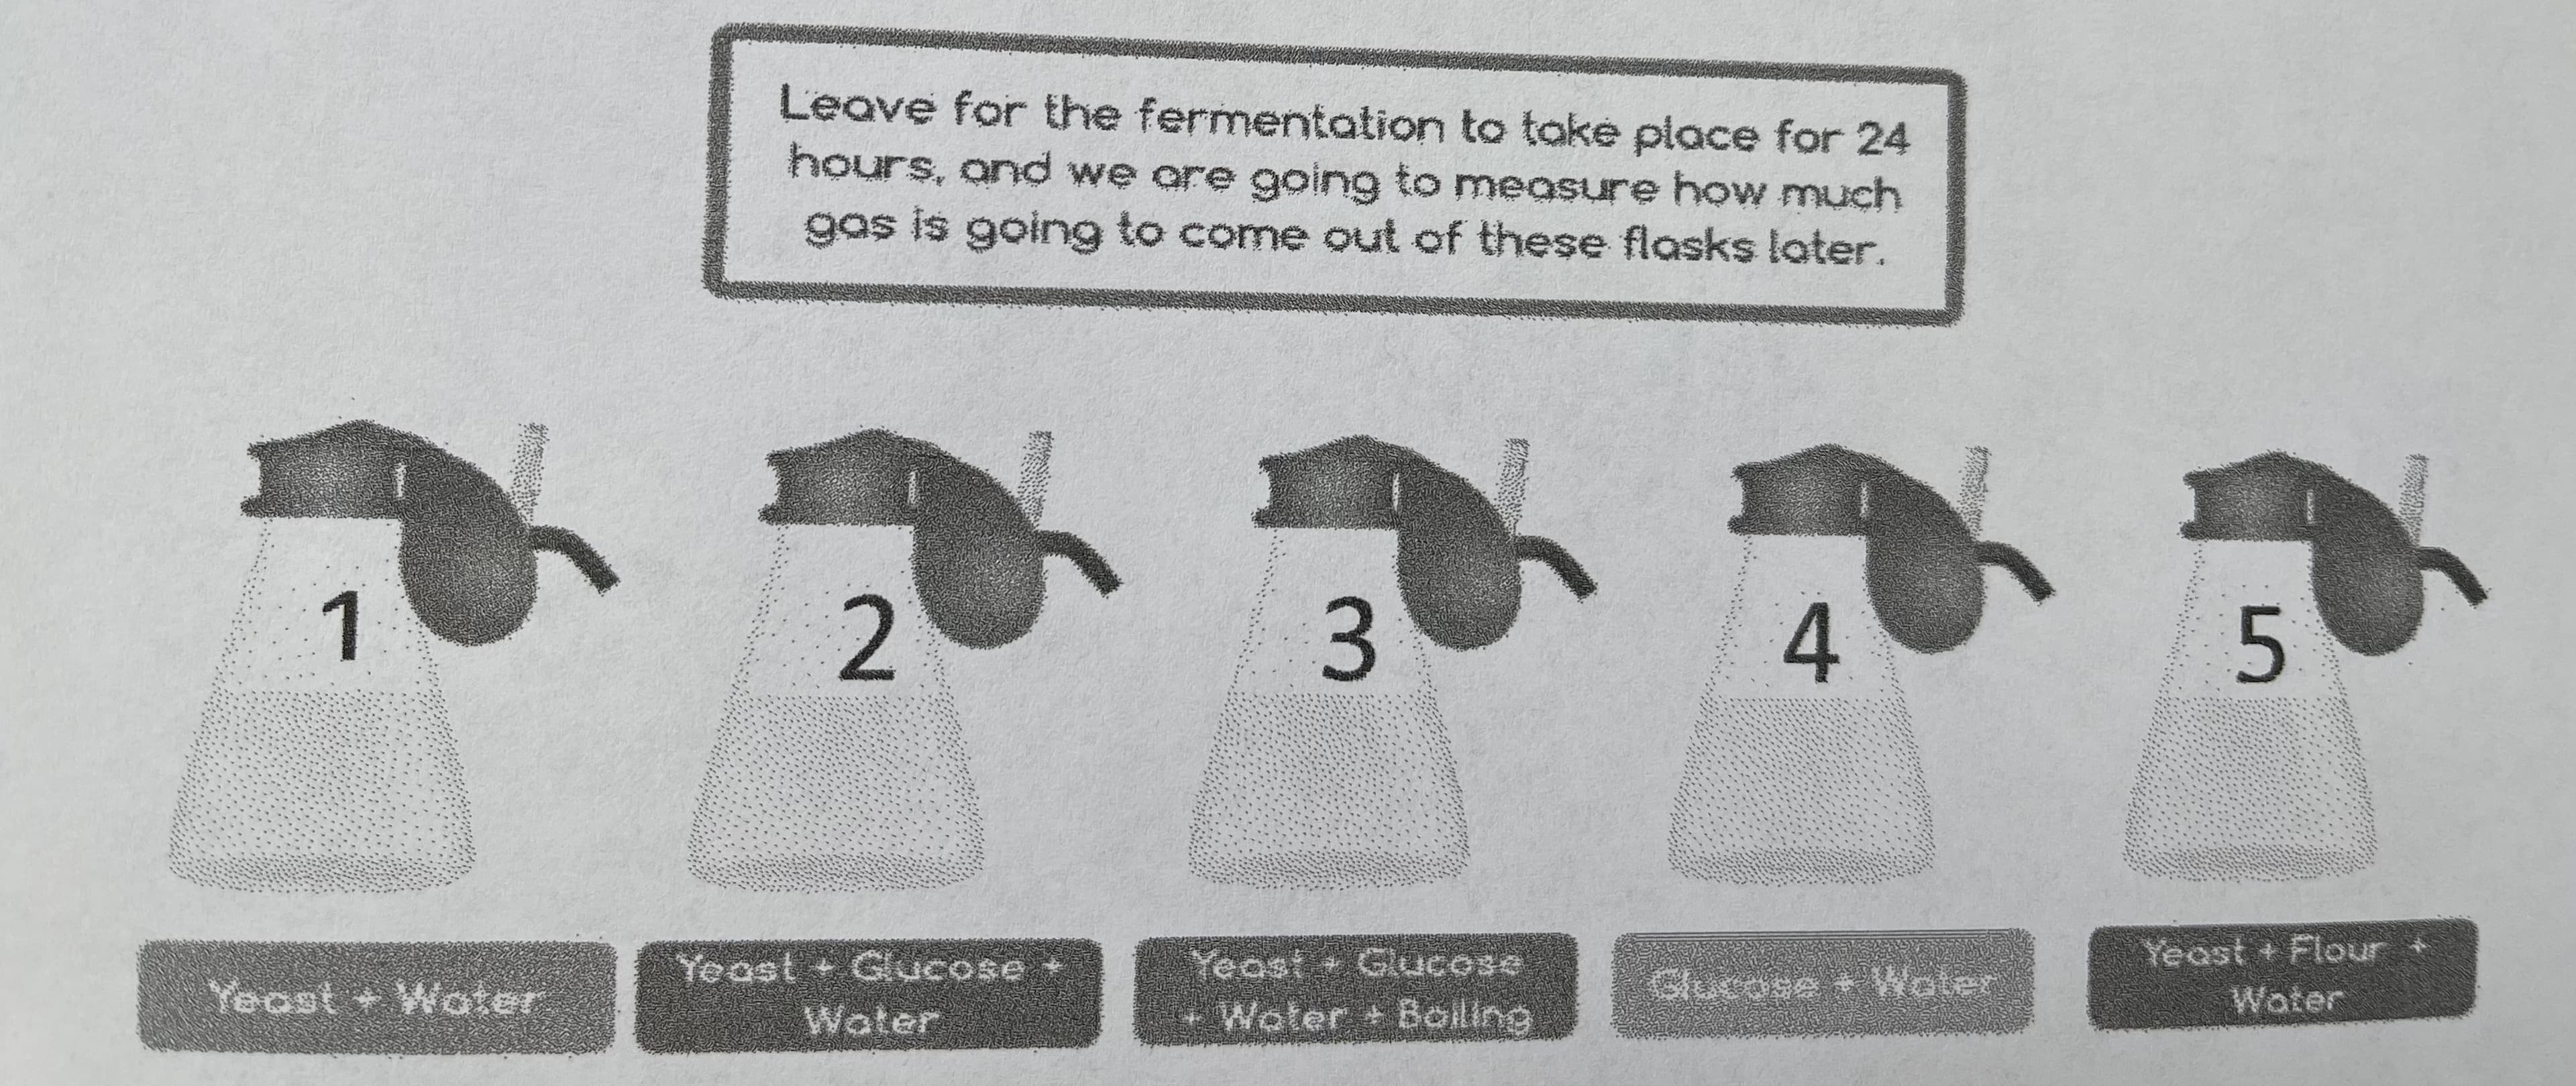 3.
Leave for the fermentation to take place for 24
hours, and we ore going to measure how much
gas is going to come out of these flasks later.
1.
4.
Yeast + Flour +
Yeast + Glucose
Water
Yeast Glucose
Woter + Boiling
Yeost + Woter
Glucase + Water
Water
